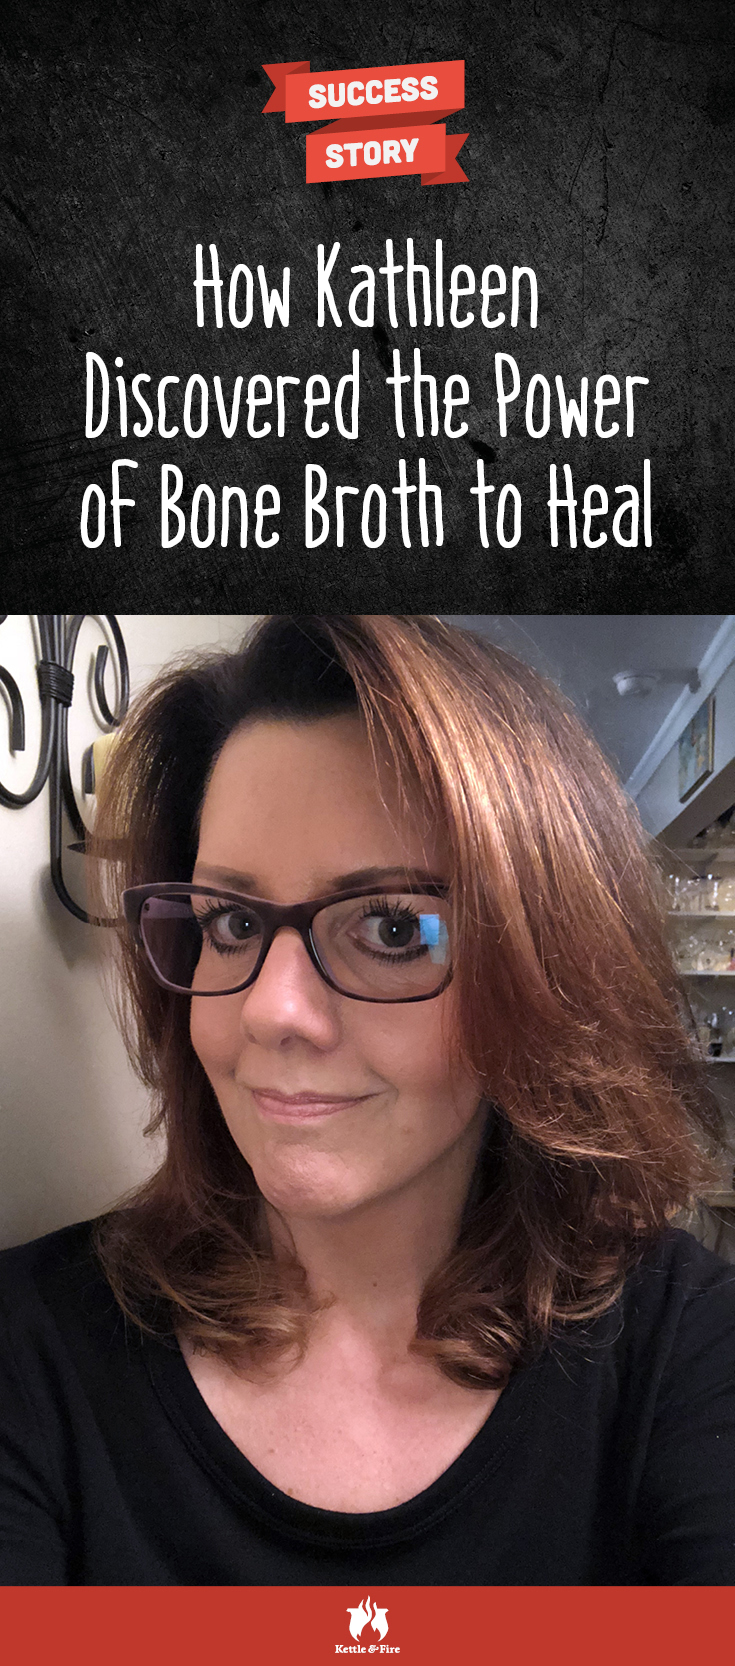 When Kathleen Brown was in her late 40s, she was 40 pounds overweight and experiencing some joint pain on her hips. She put her feet down to lose weight and live a healthy life. Learn how Kathleen discovered the power of bone broth to heal after her surgery in this story. 